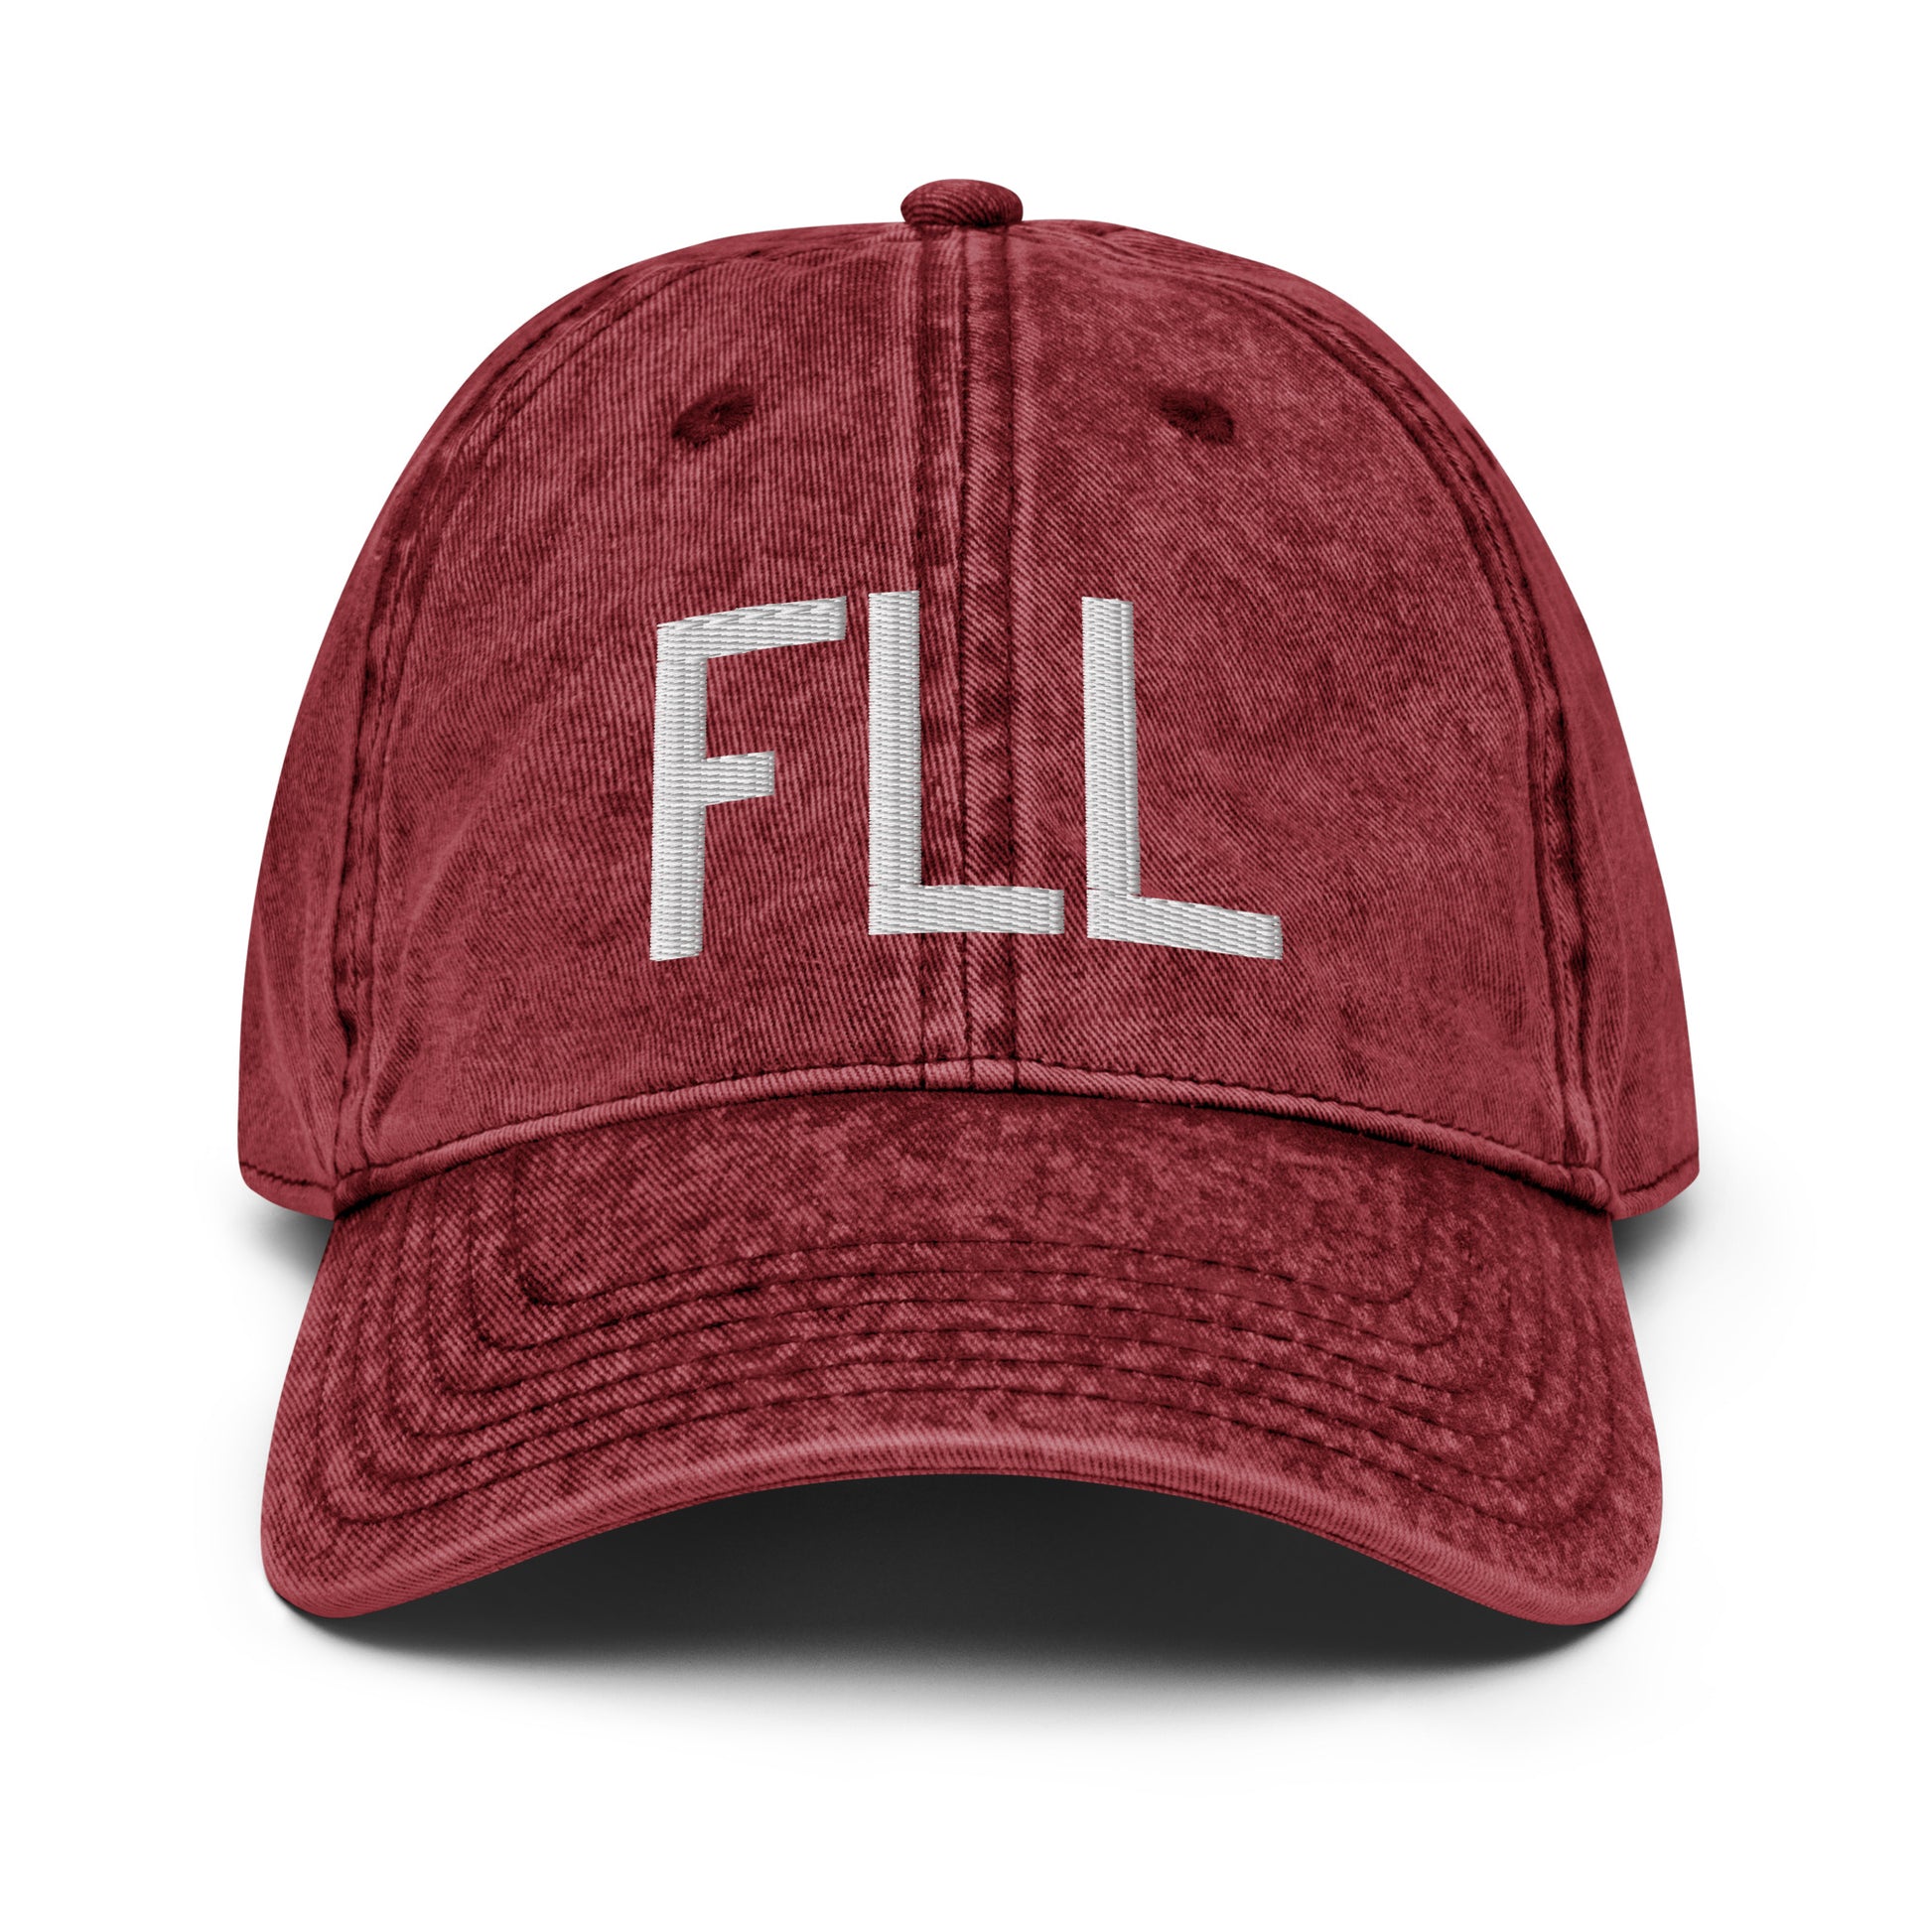 Airport Code Twill Cap - White • FLL Fort Lauderdale • YHM Designs - Image 19